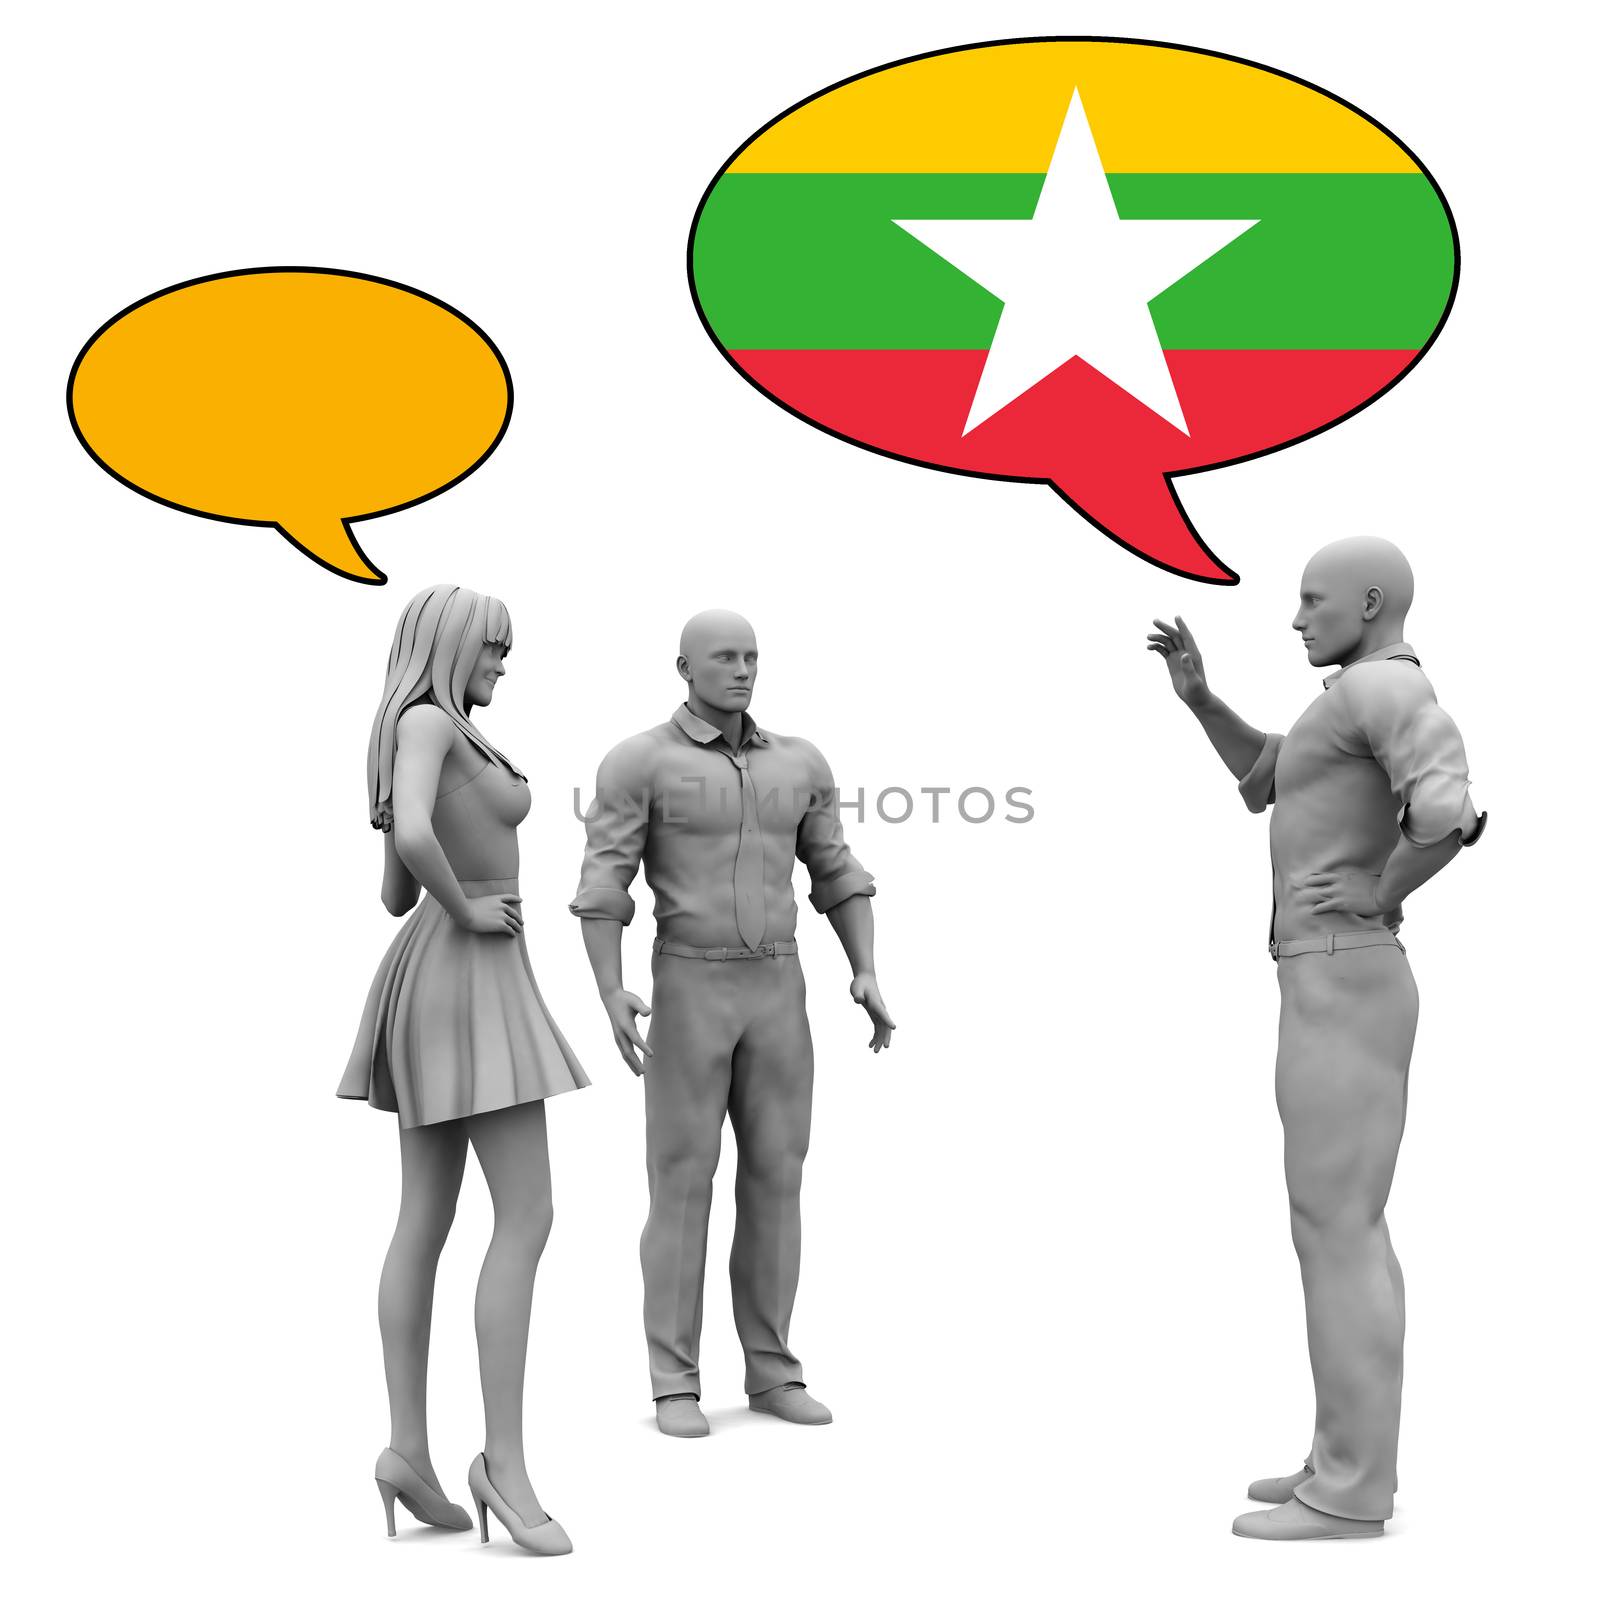 Learn Burmese Culture and Language to Communicate